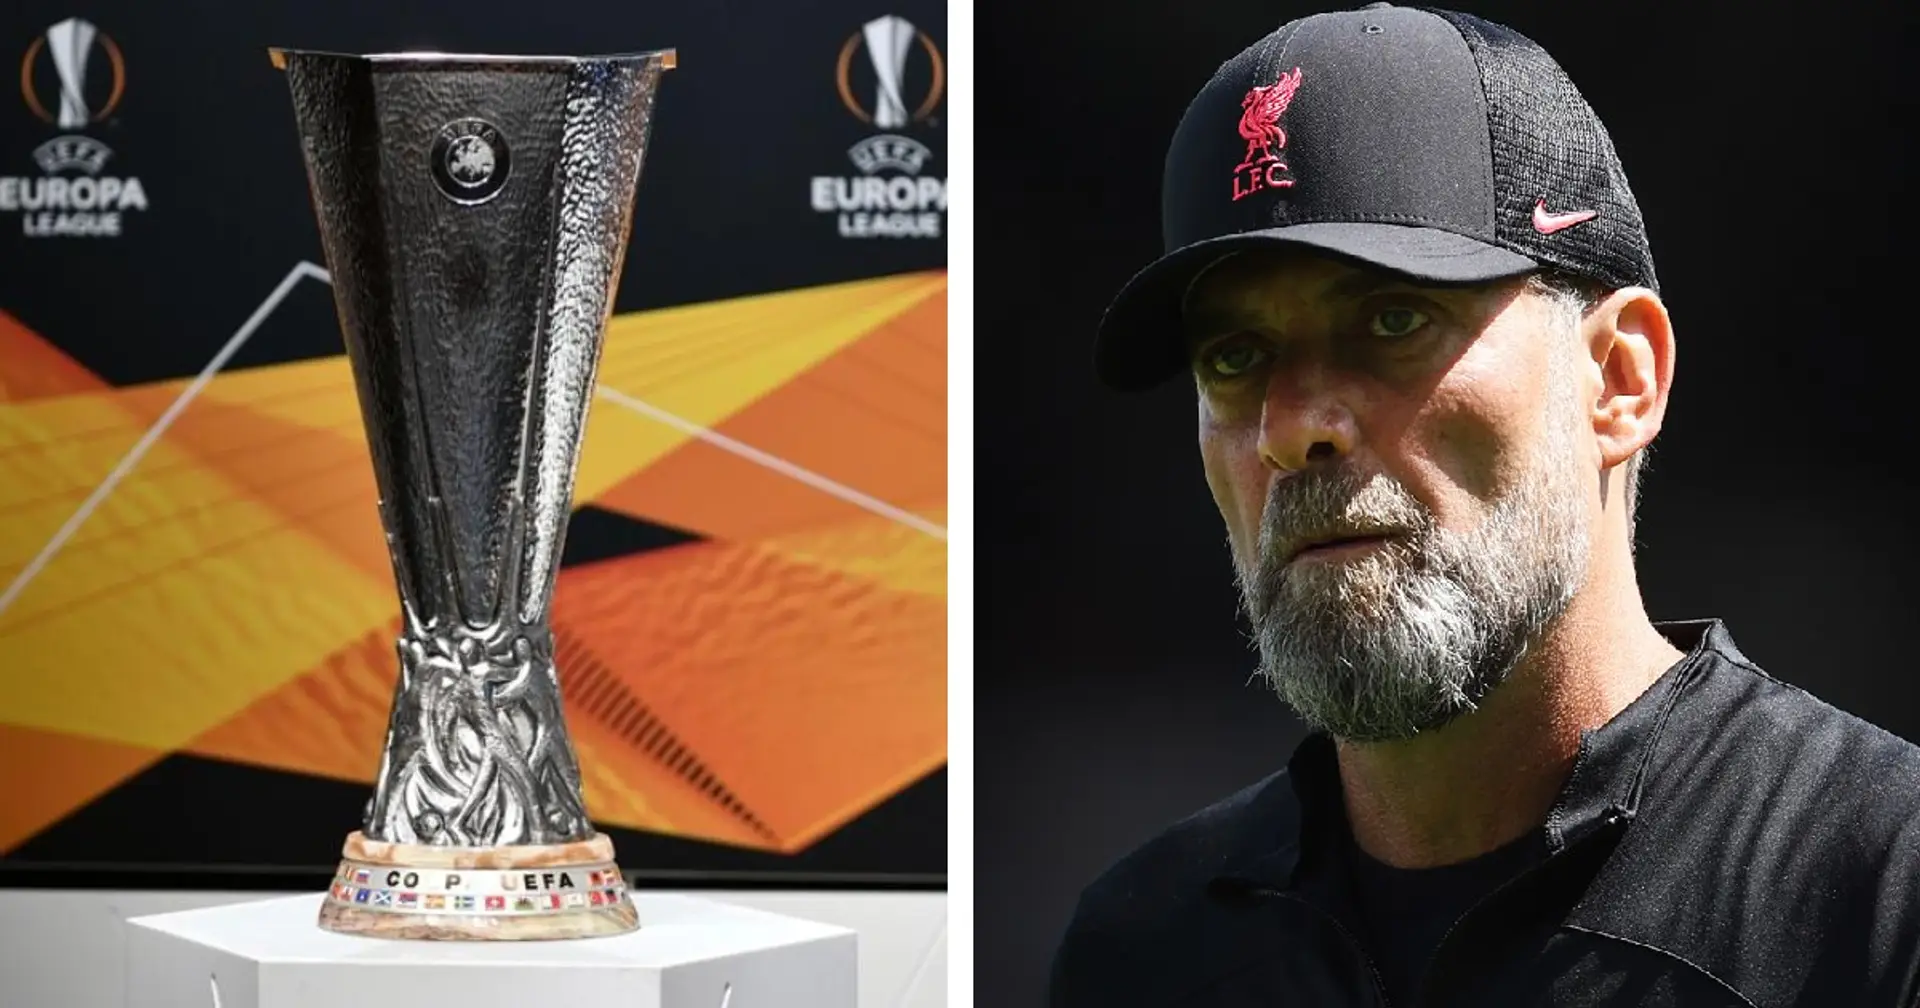 Europa League final ticket allocation revealed & 2 more under-radar stories at Liverpool today